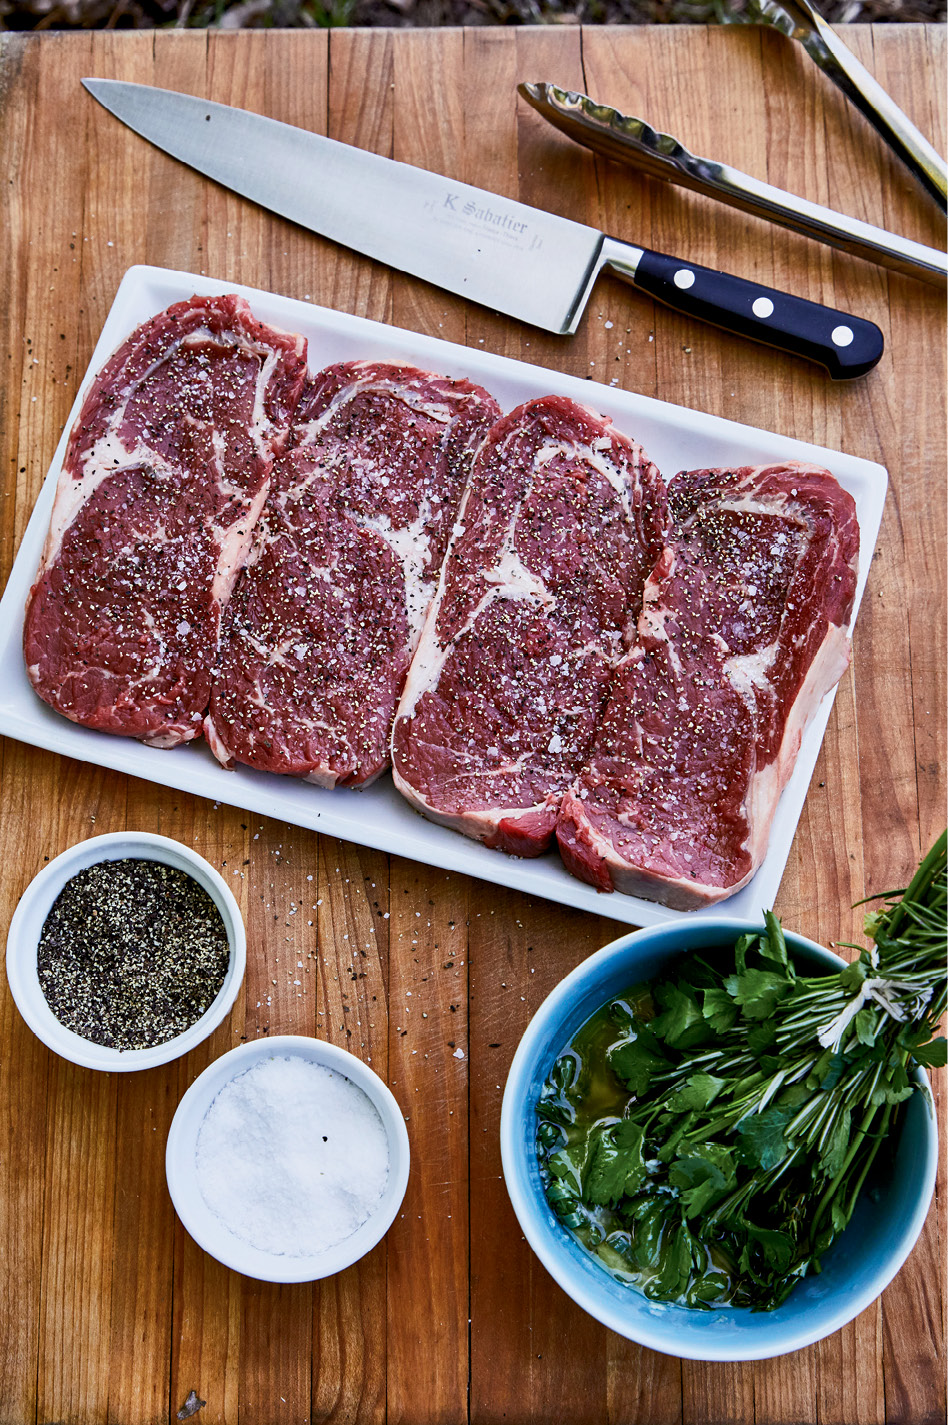 Raise the Steaks: The pitmaster seasons rib eyes simply with salt and pepper and then glazes the meat using a savory herb bundle of thyme, rosemary, parsley, and tarragon dunked in melted garlic butter.